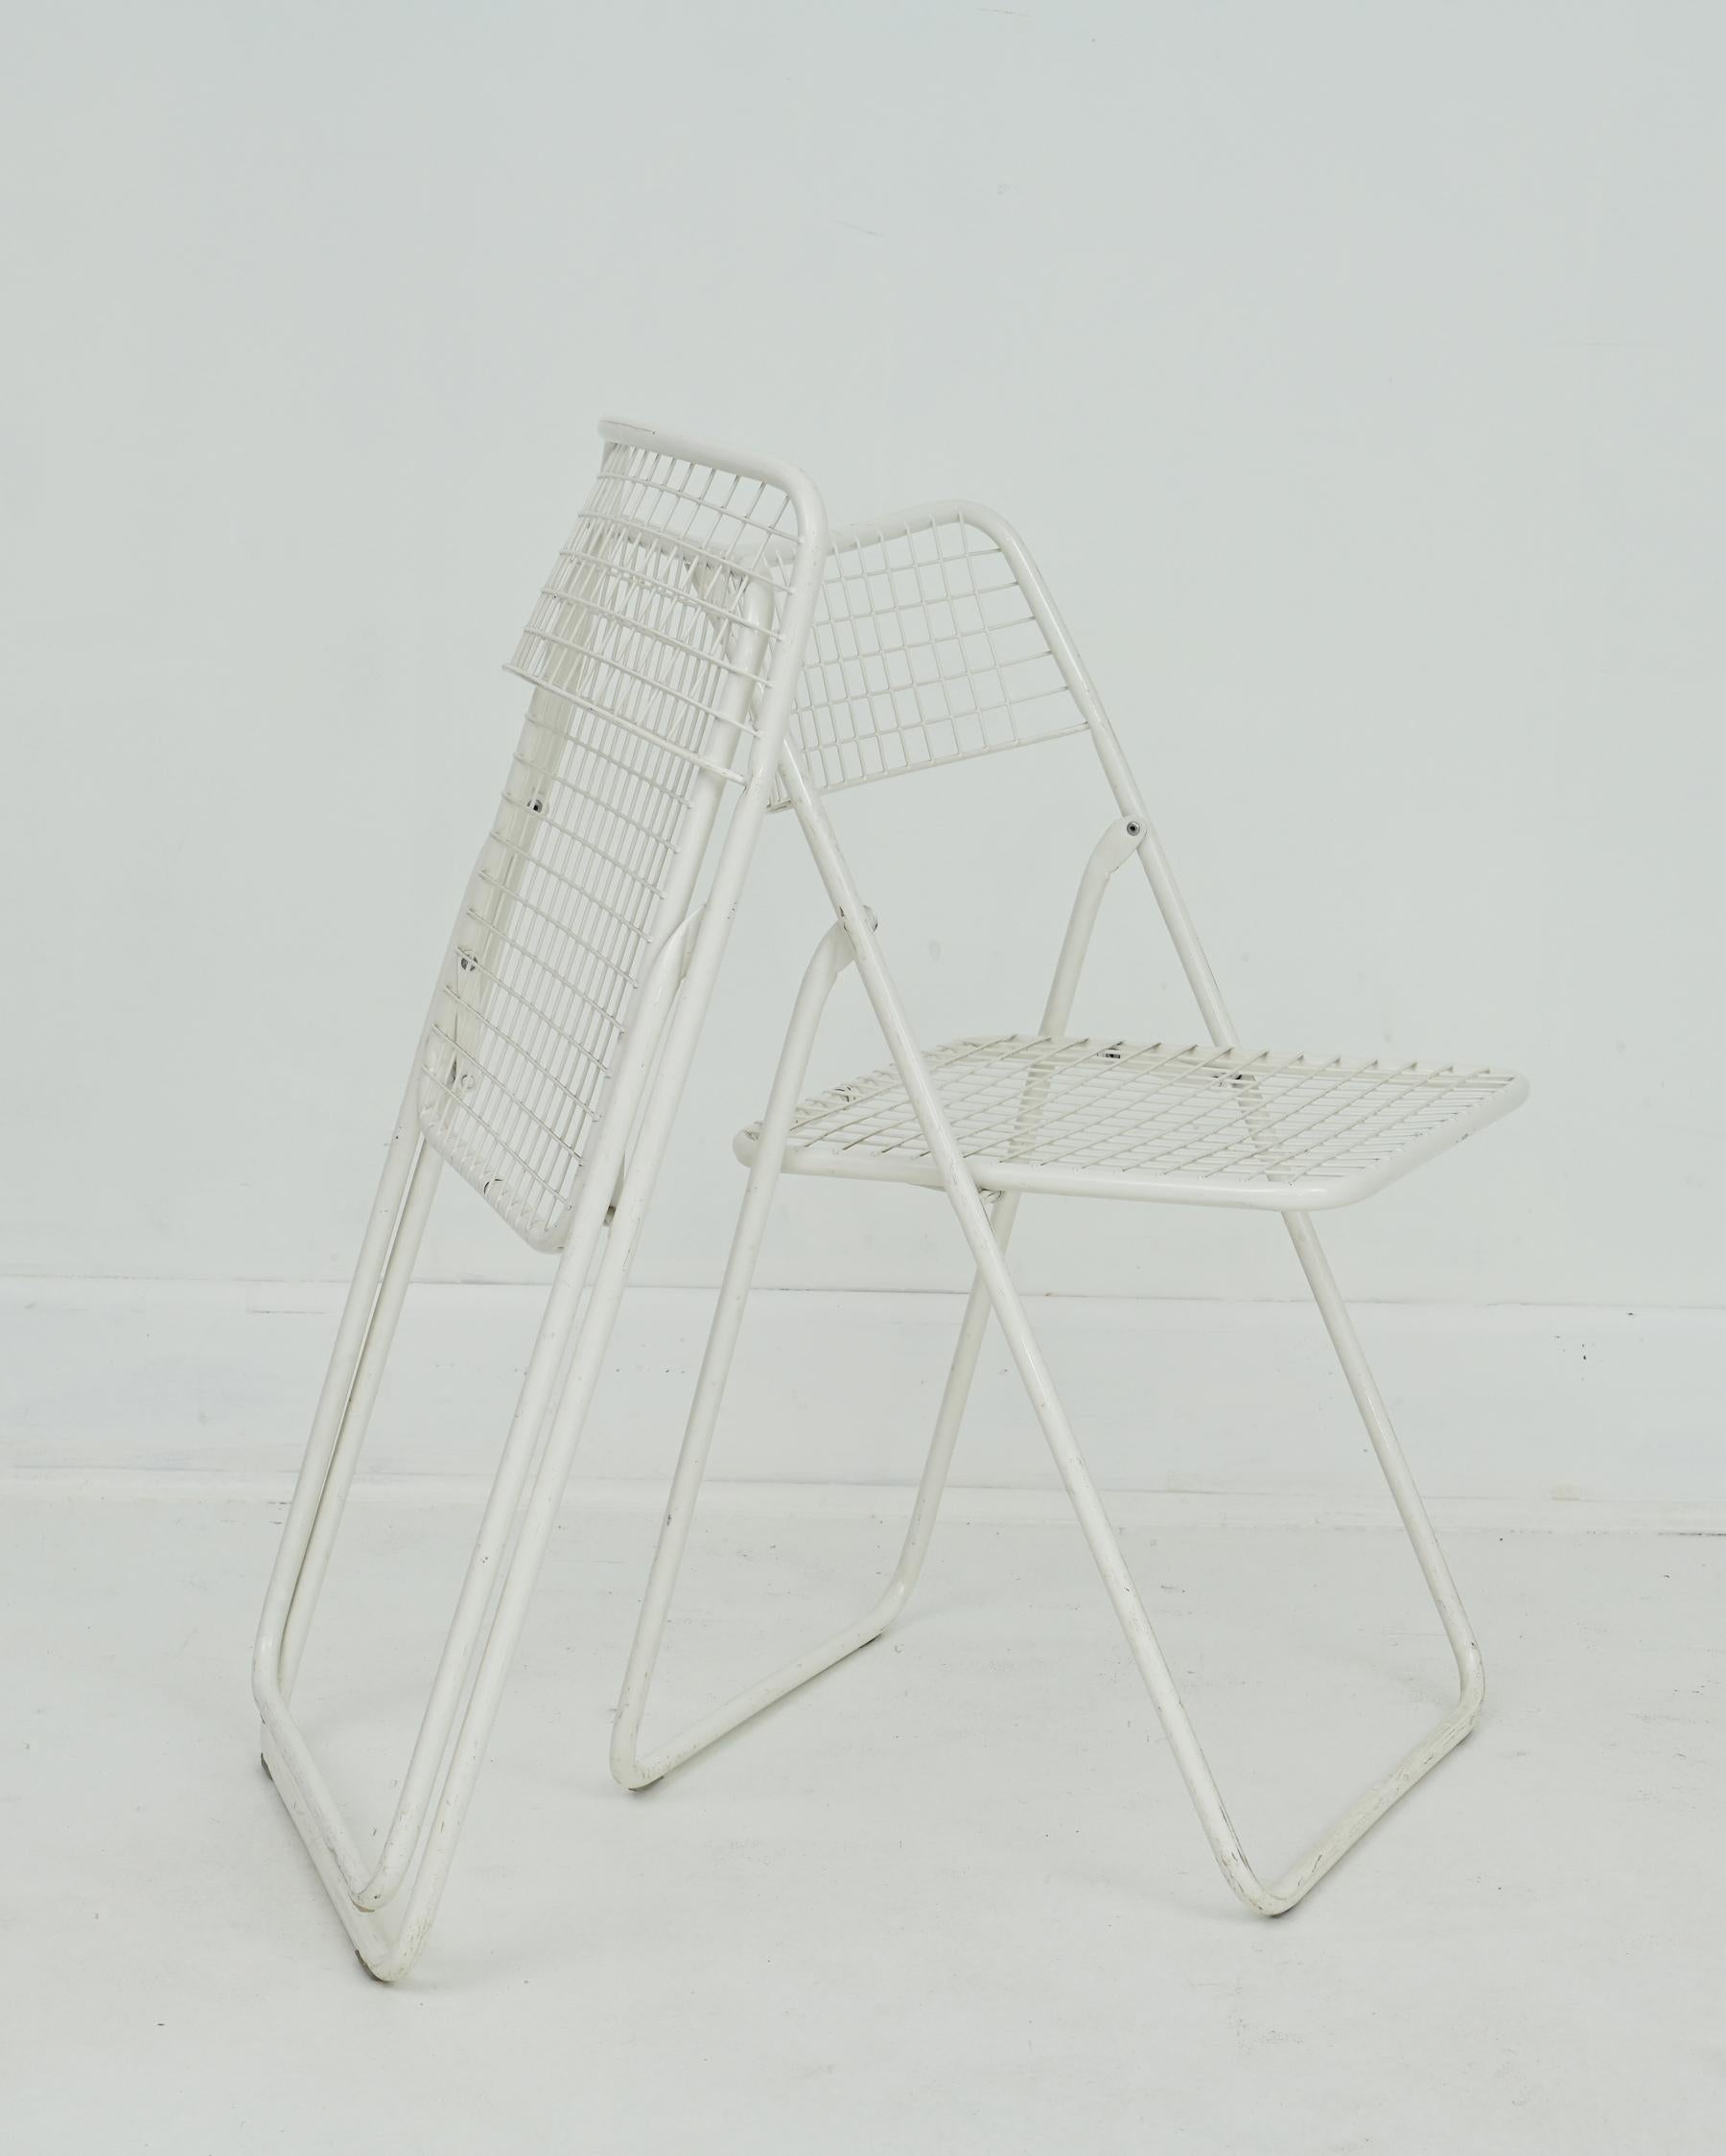 Space Age 1979 Niels Gammelgaard Ted Net White Metal Grid Folding Chairs for IKEA For Sale